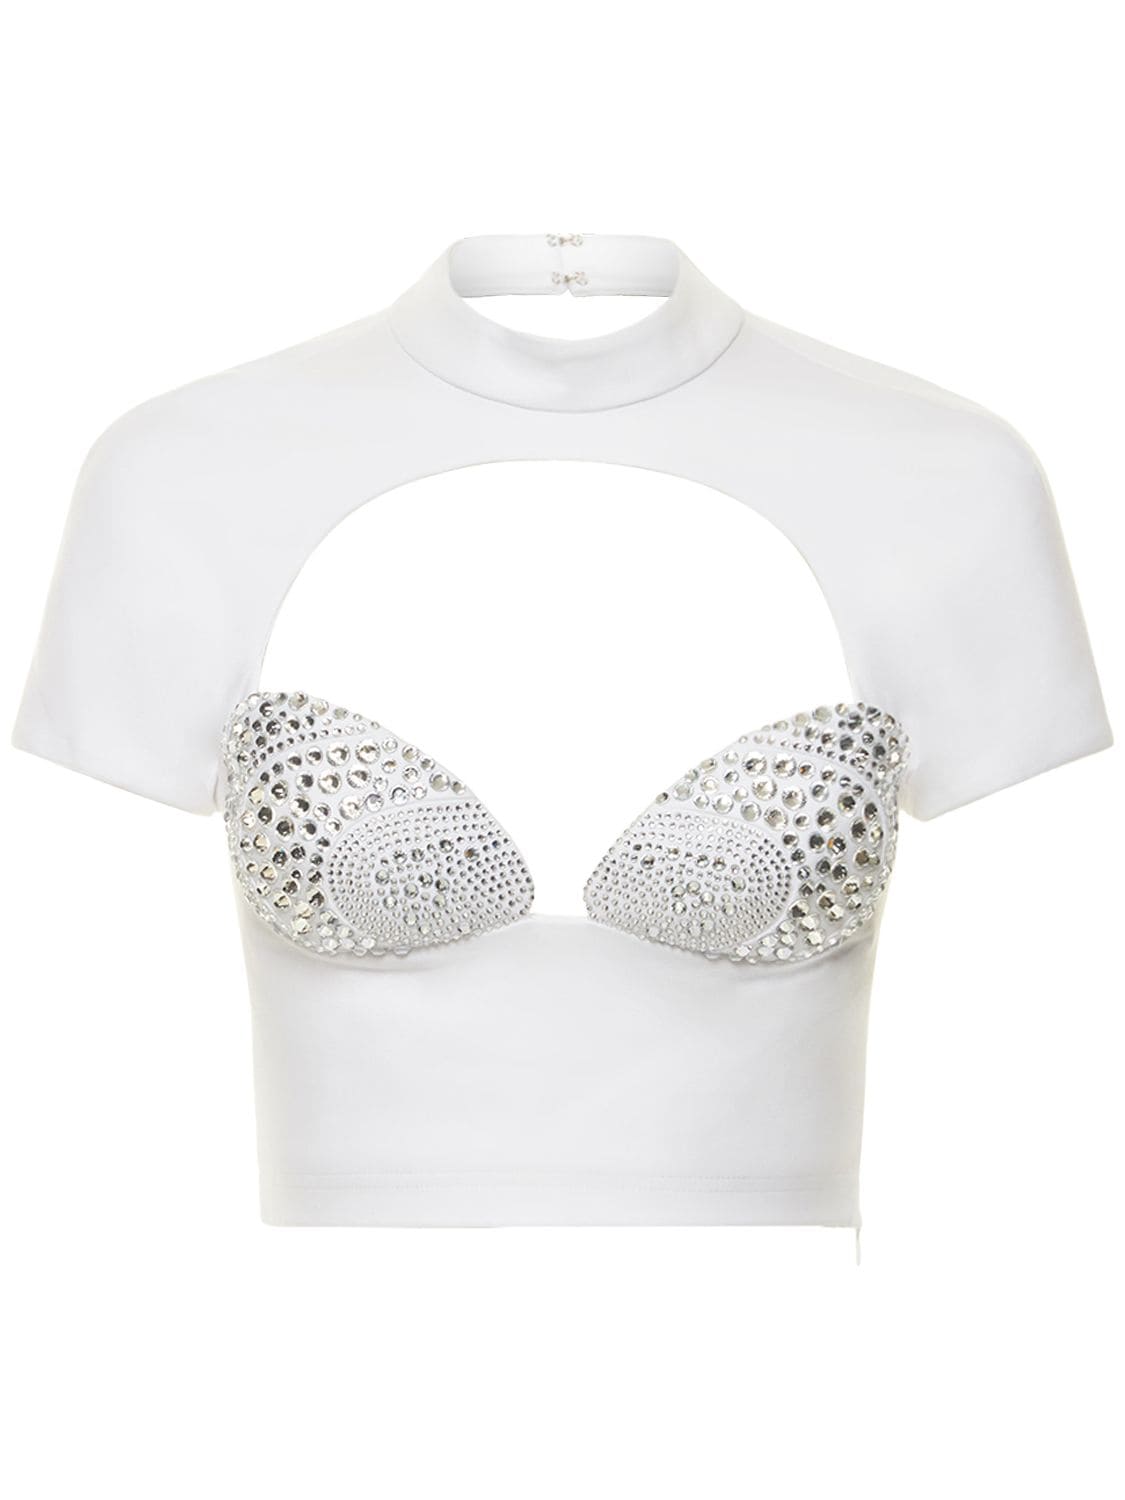 AREA Embellished Mussel Cup T-shirt